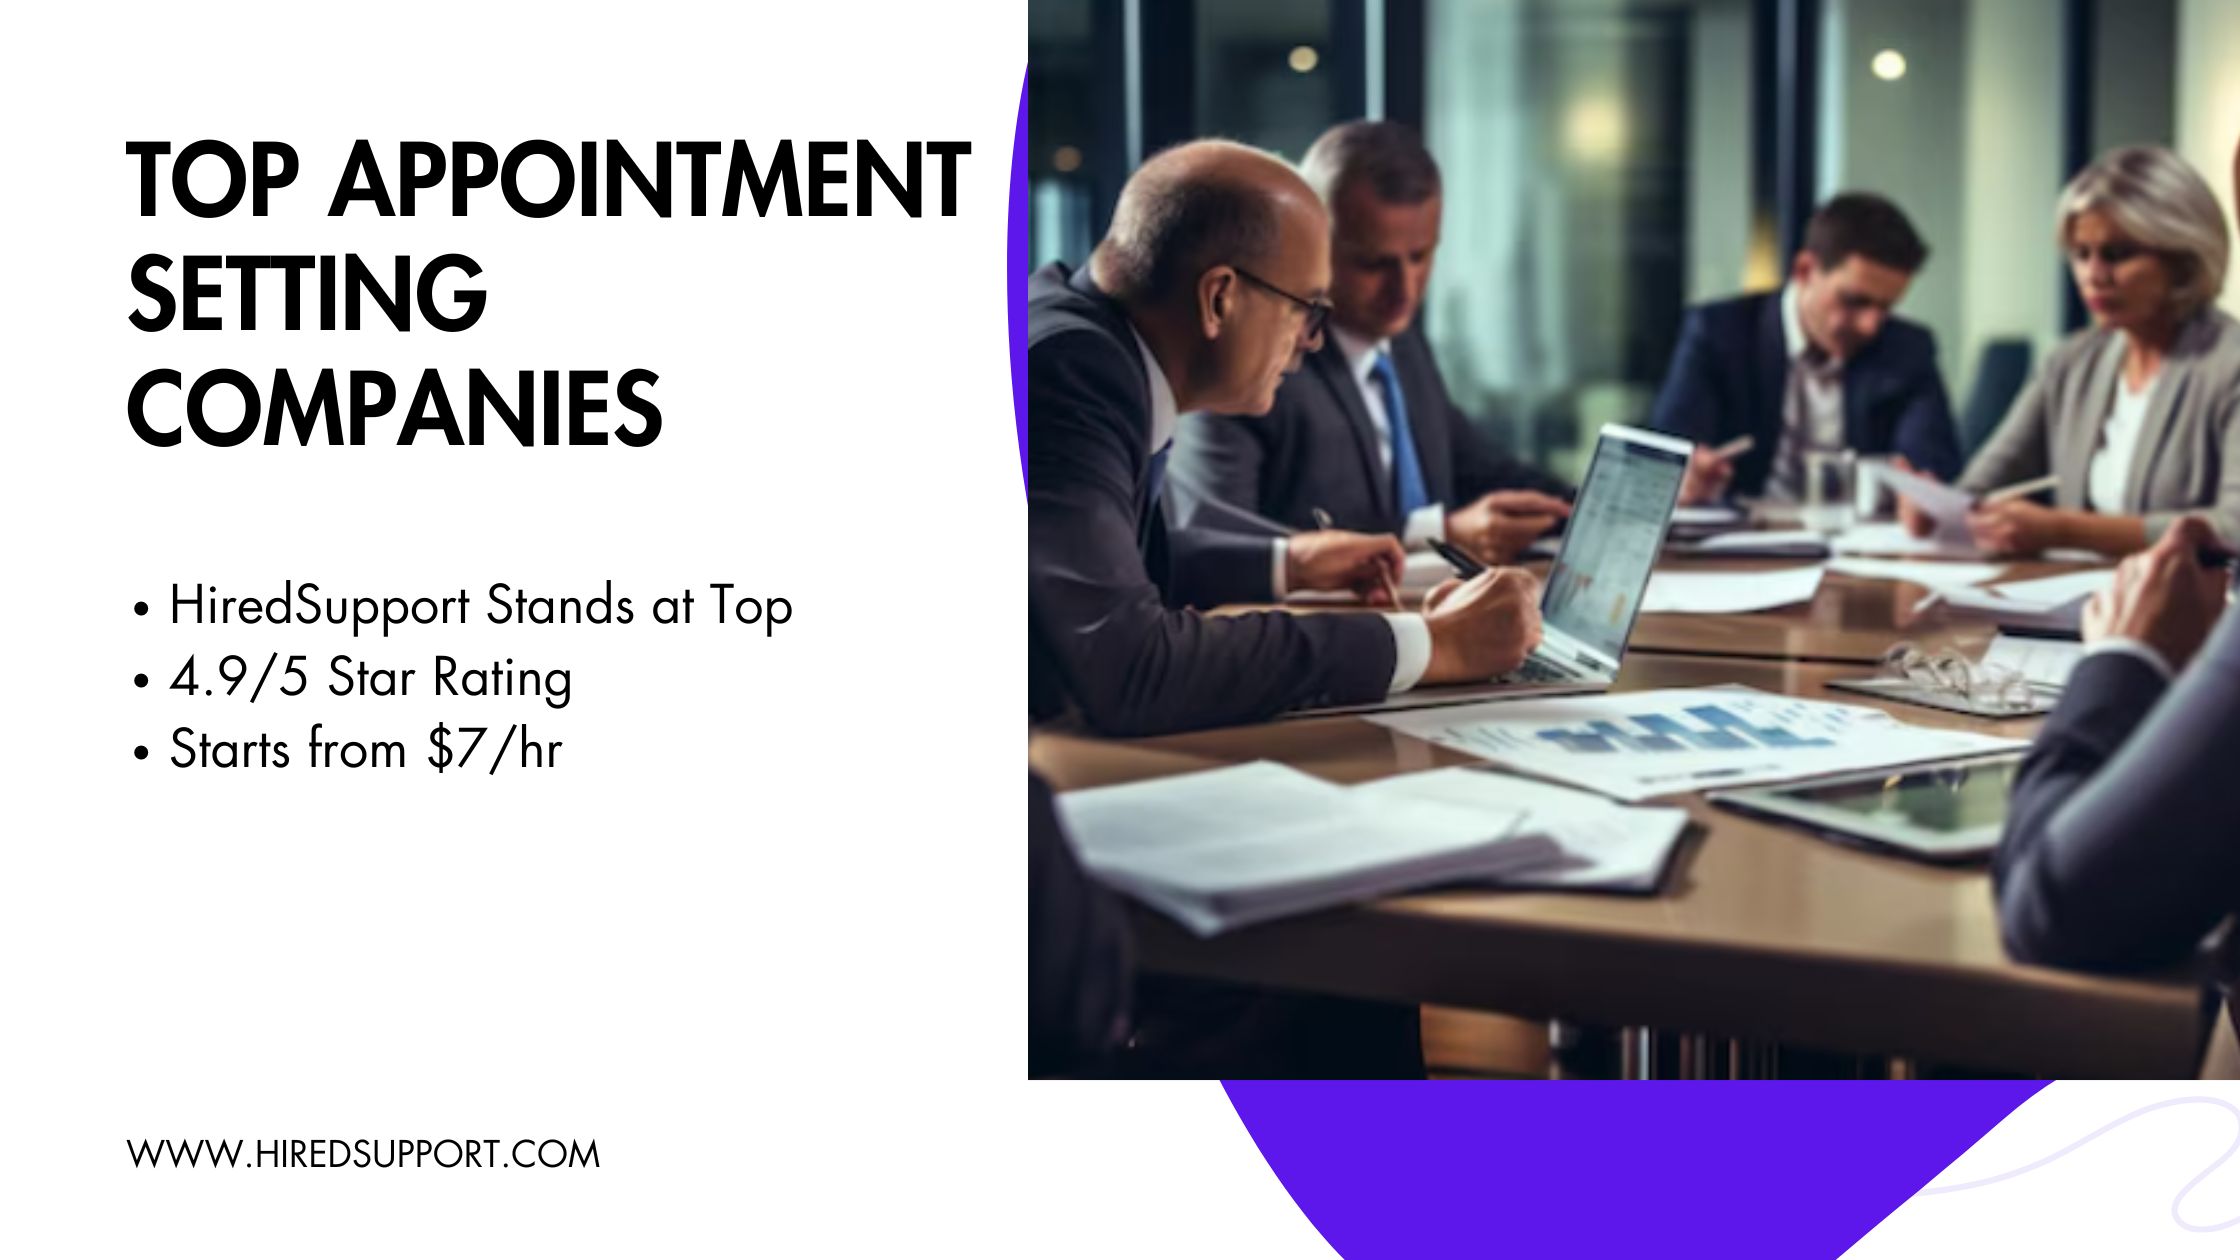 Top Appointment Setting Companies